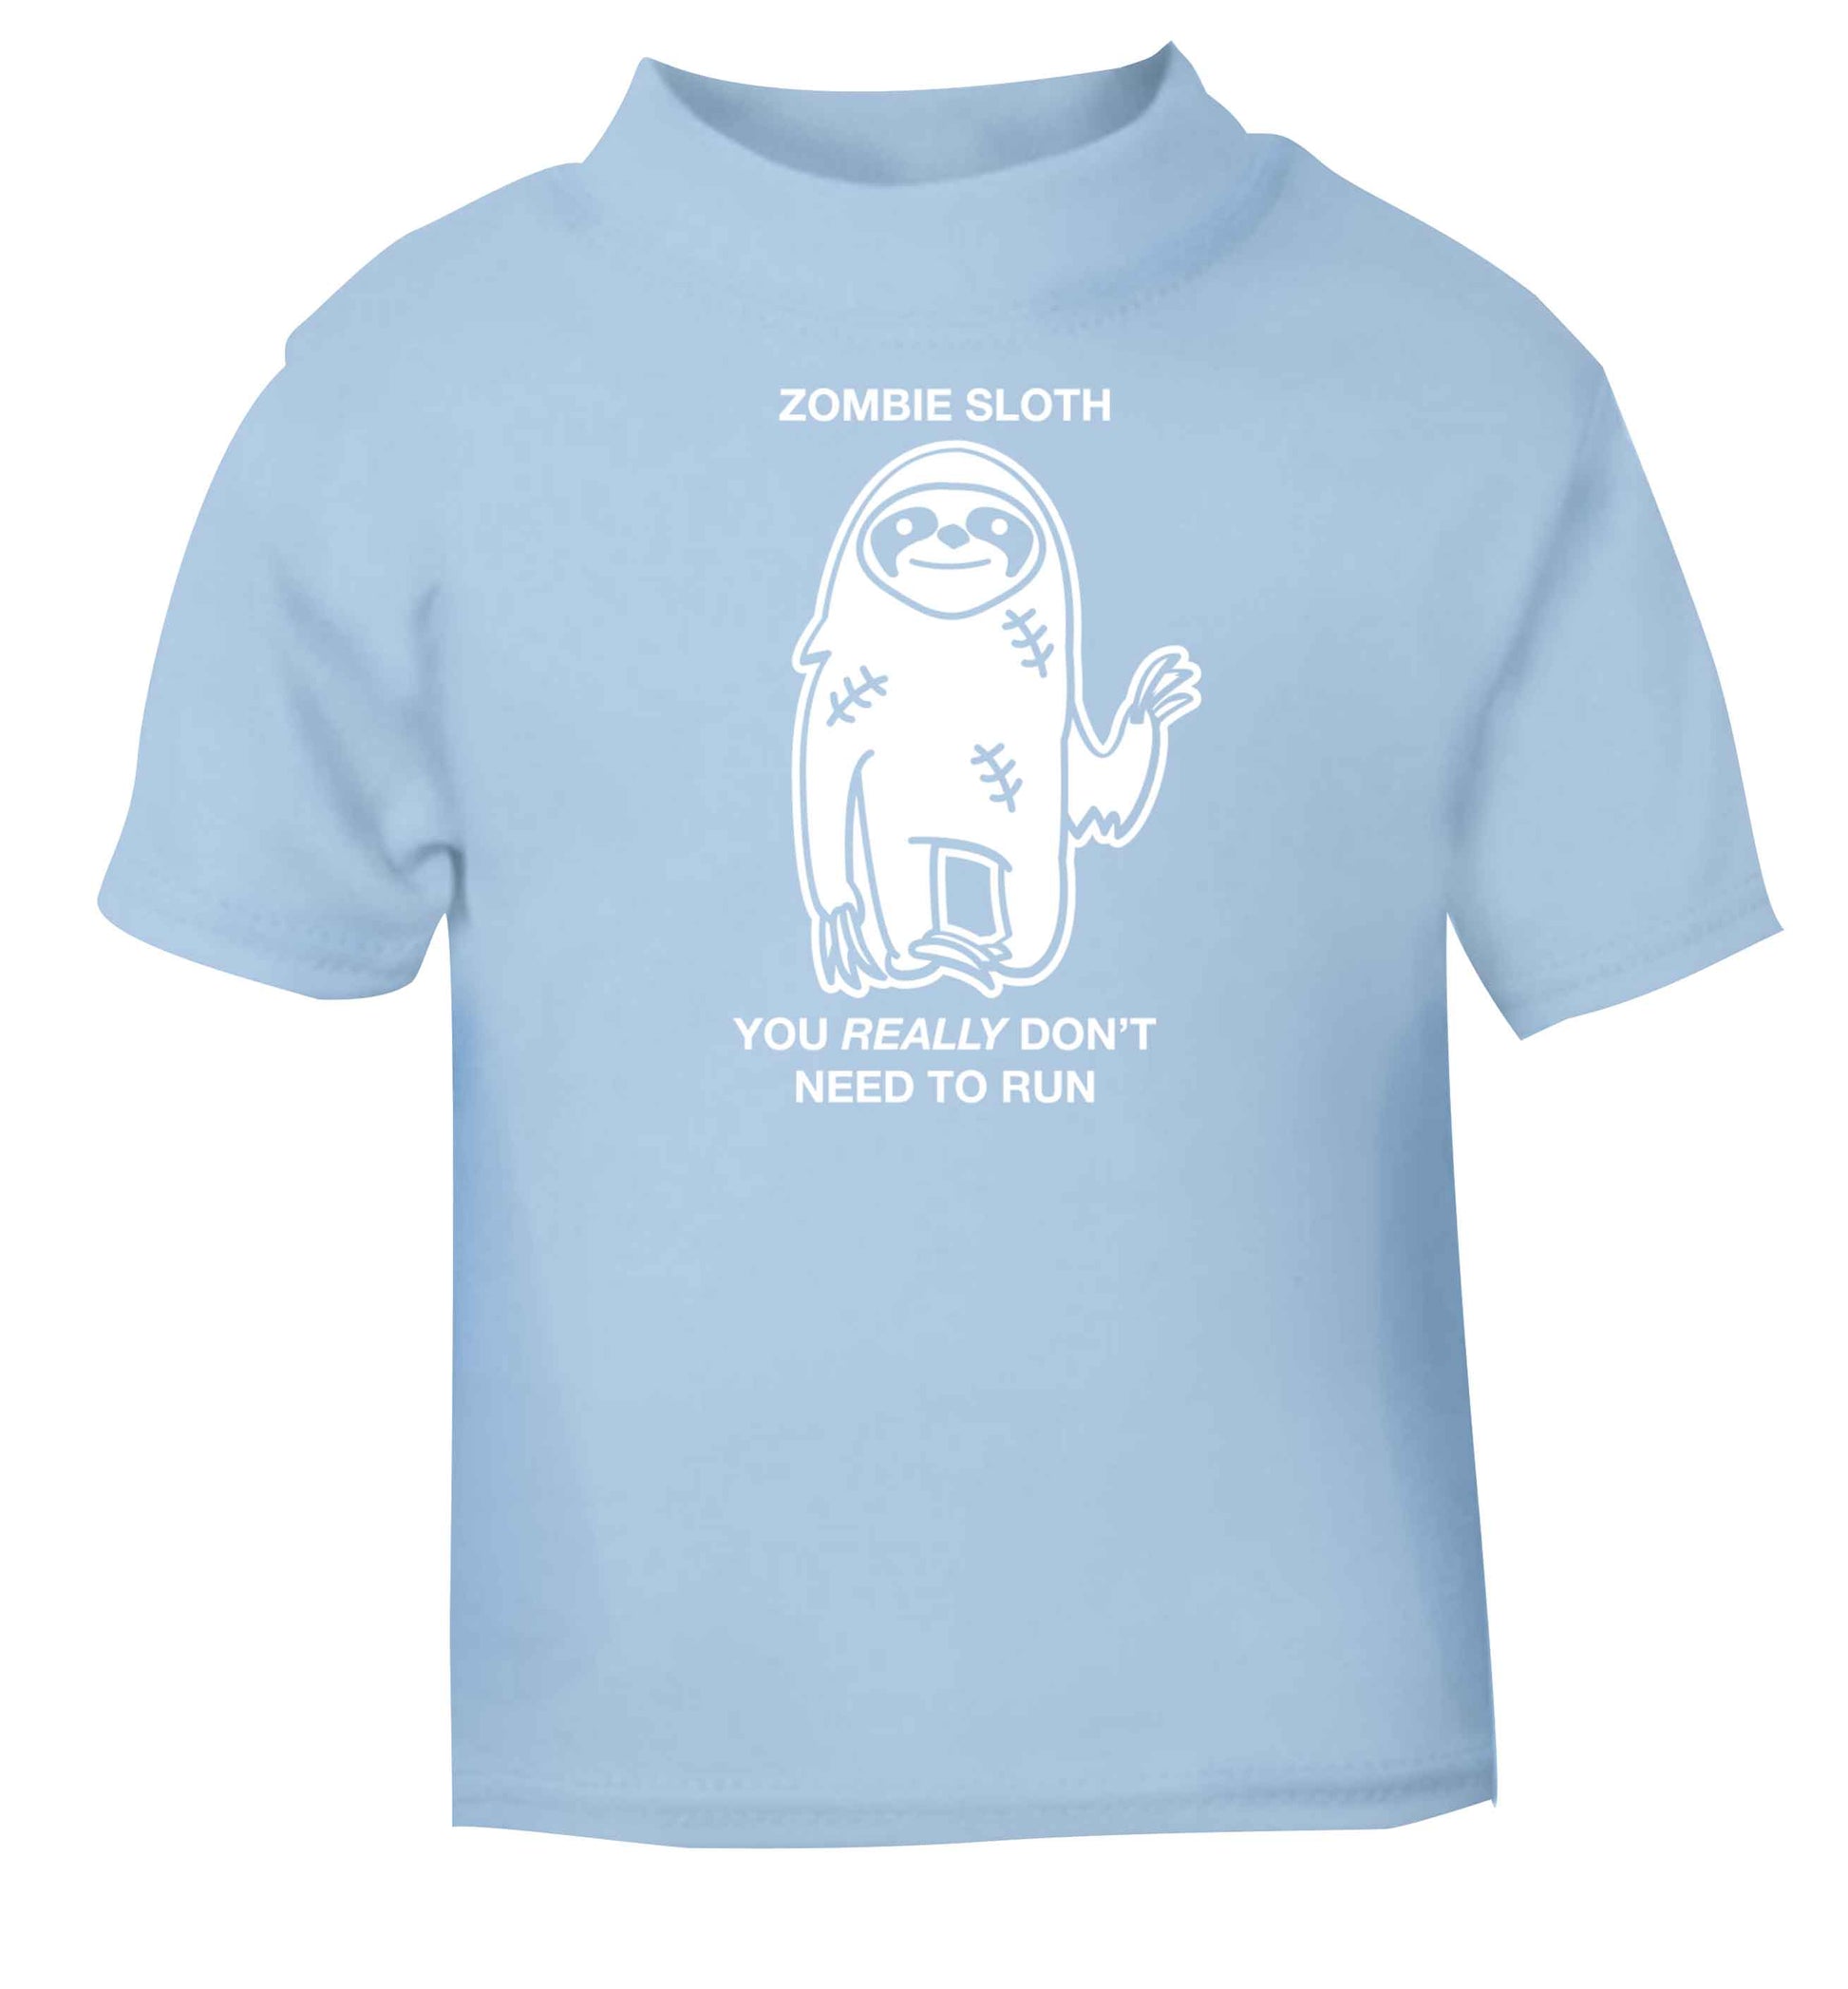 Zombie sloth you really don't need to run light blue baby toddler Tshirt 2 Years